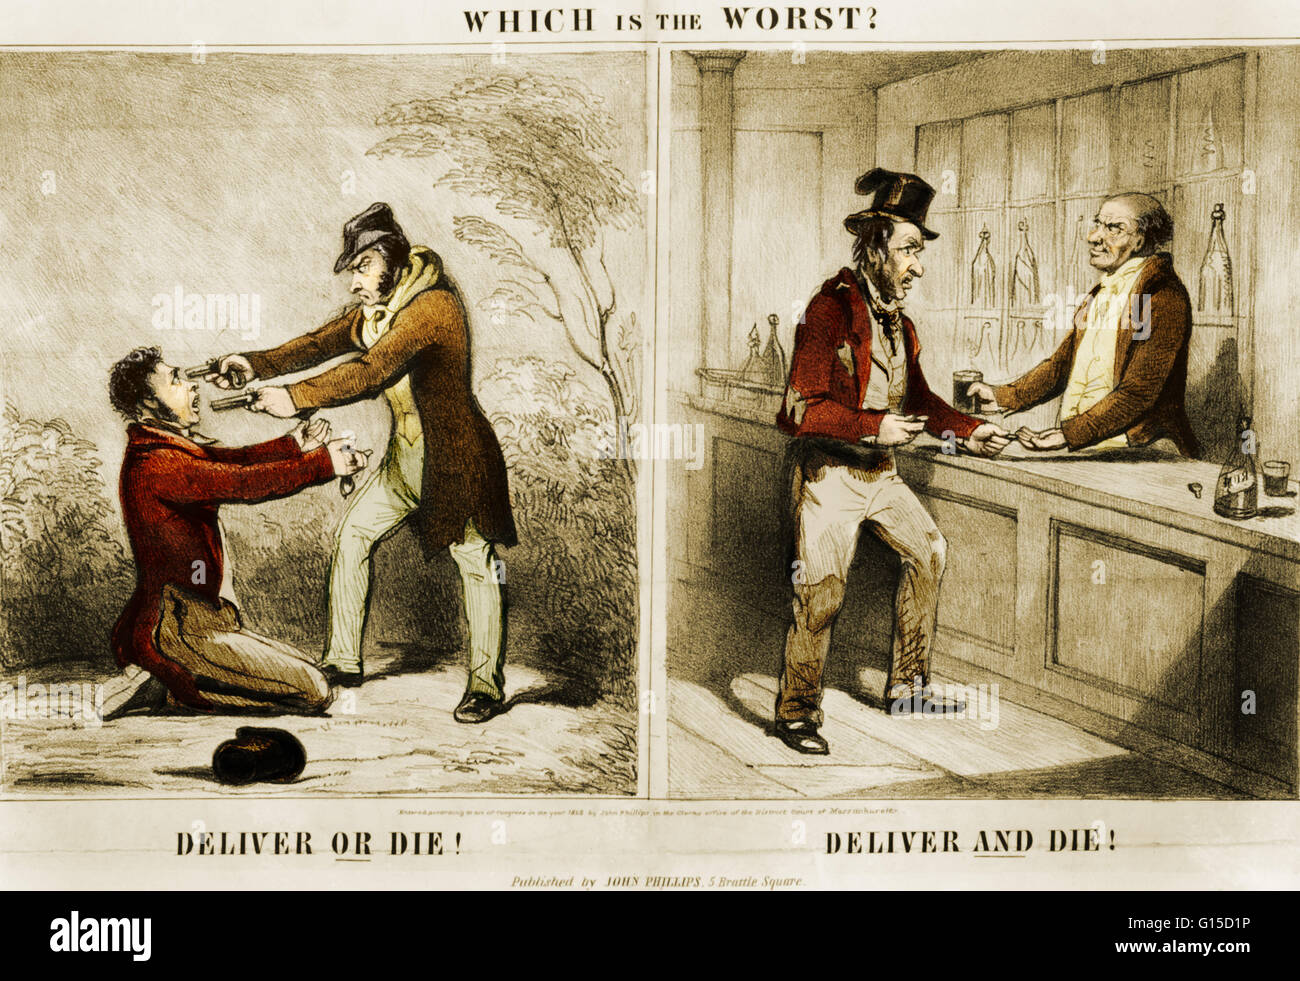 Political illustration asking 'Which is the Worst?' On the left, a man is robbed and the caption reads 'Deliver or die!'; on the other, a man buys a drink and the caption reads 'Deliver and die!'. Stock Photo